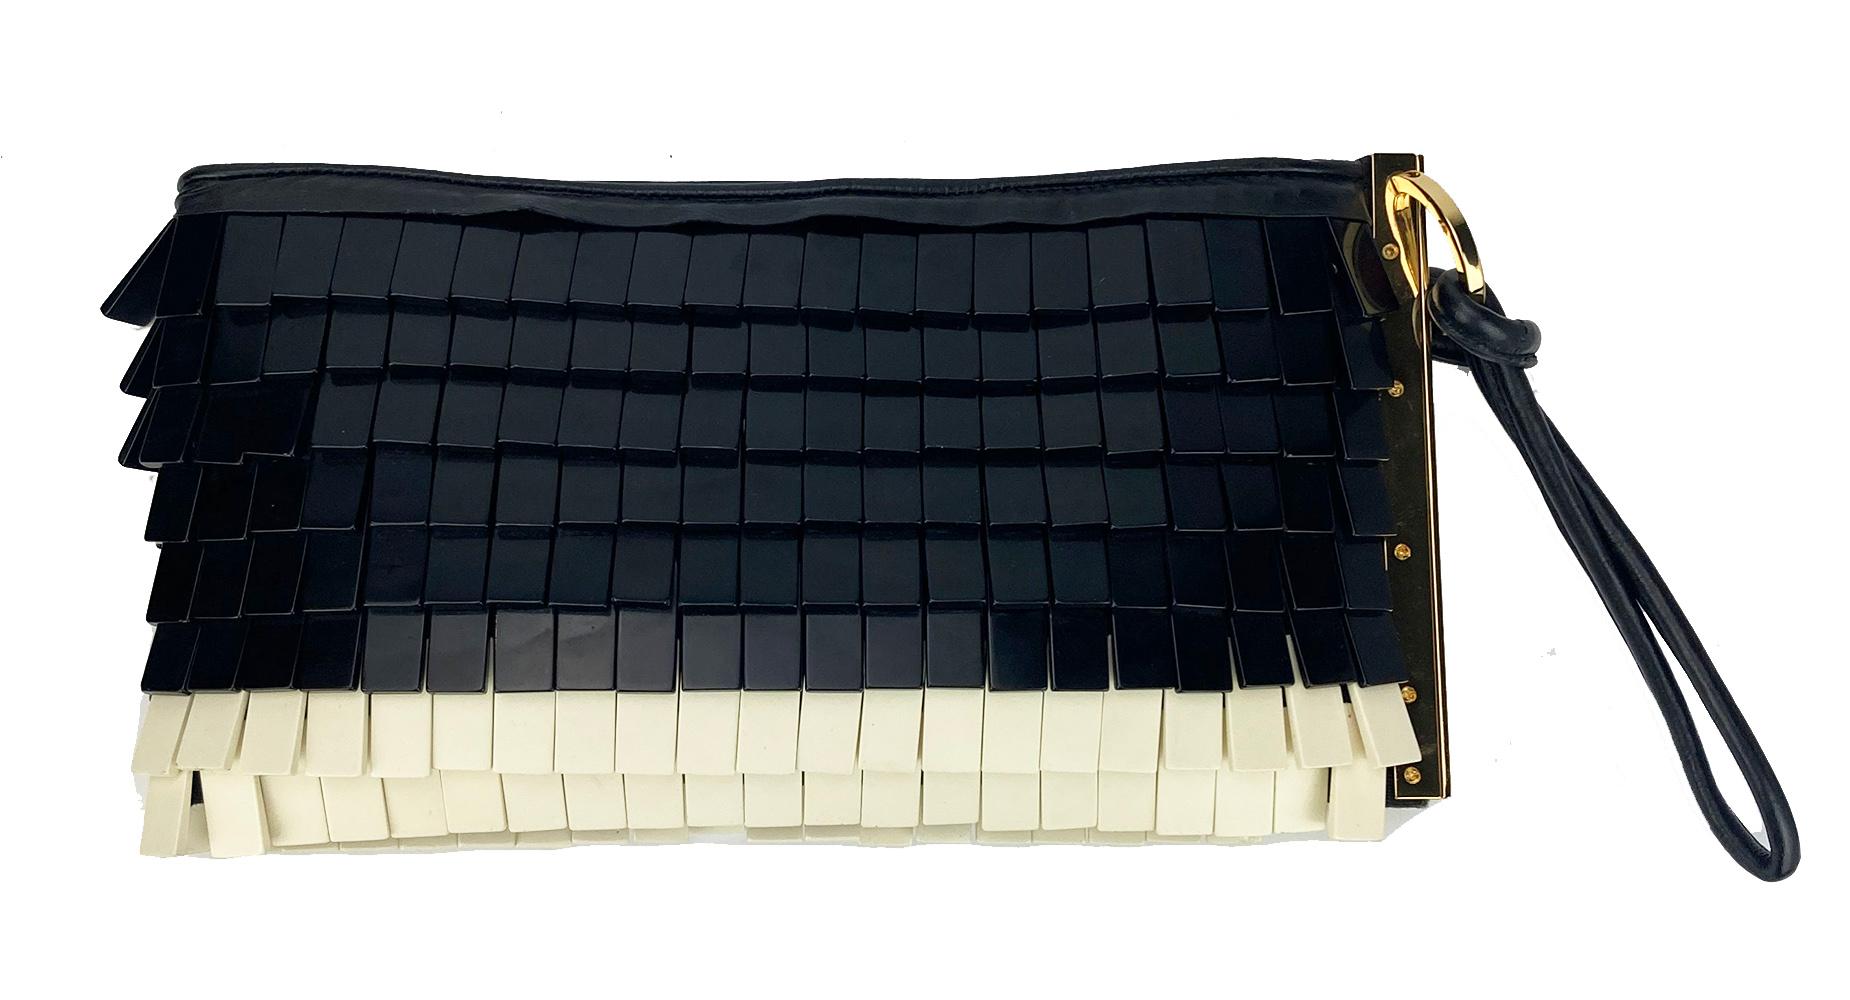 Herve Leger Black and White Acrylic Chip Fringe Clutch in excellent condition. Unique Black and white acrylic small rectangle beads throughout exterior trimmed with black leather and gold hardware. Leather wrist strap. Engraved hardware. Top zipper